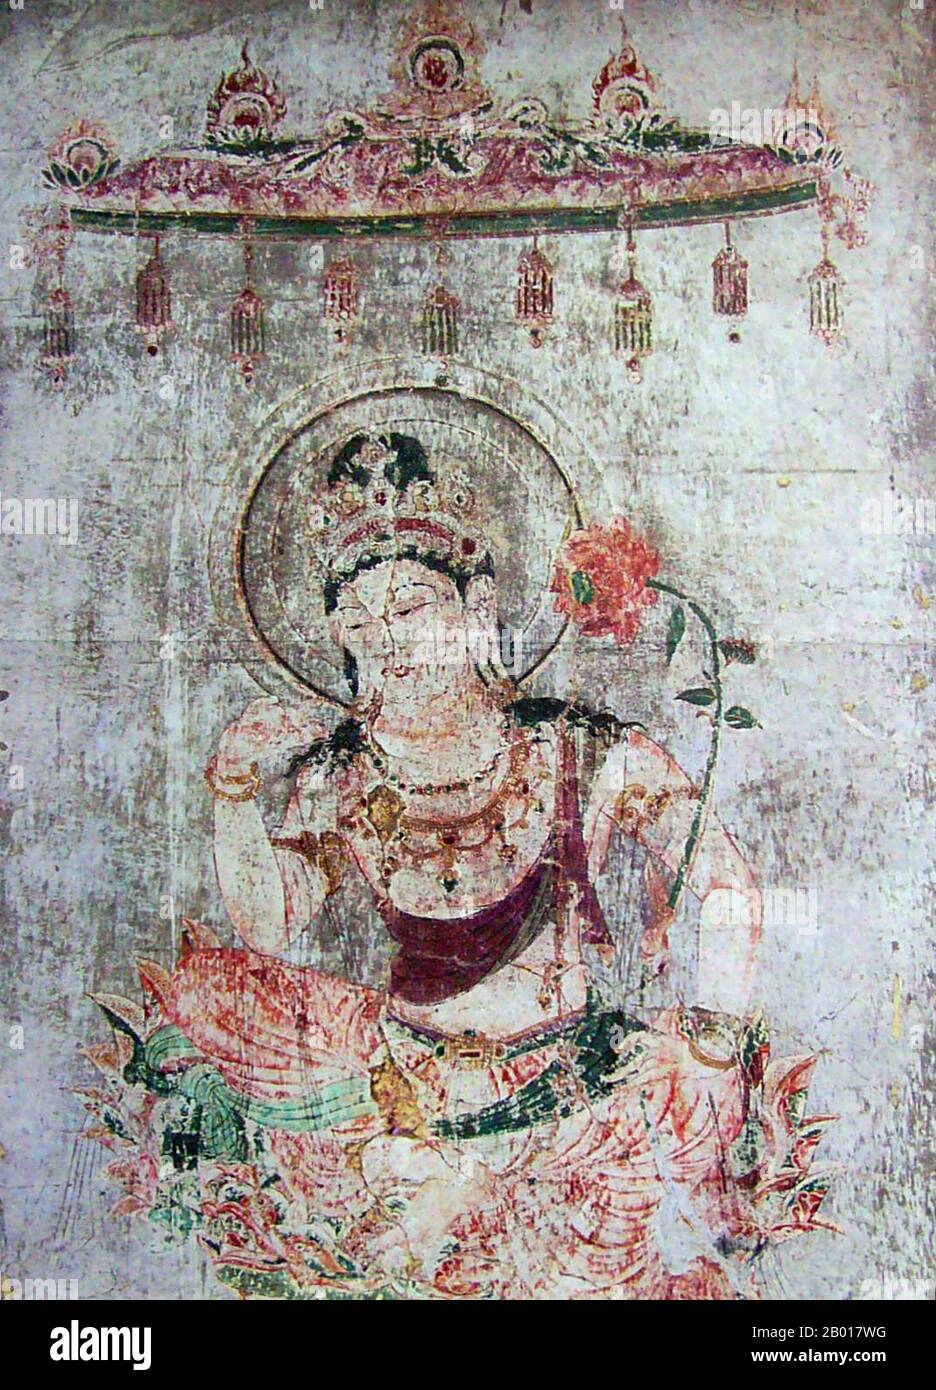 Japan: Lost Horyuji Temple fresco from a pre-1949 photograph: No.2 wall, Bodhisattva, detail.  Hōryū-ji (Temple of the Flourishing Law) is a Buddhist temple in Ikaruga, Nara Prefecture, Japan. Its full name is Hōryū Gakumonji, or Learning Temple of the Flourishing Law, the complex serving both as a seminary and a monastery.  In 1993, Hōryū-ji was inscribed as a UNESCO World Heritage Site under the name Buddhist Monuments in the Hōryū-ji Area. The Japanese government lists several of its structures, sculptures and artifacts as National Treasures. Stock Photo